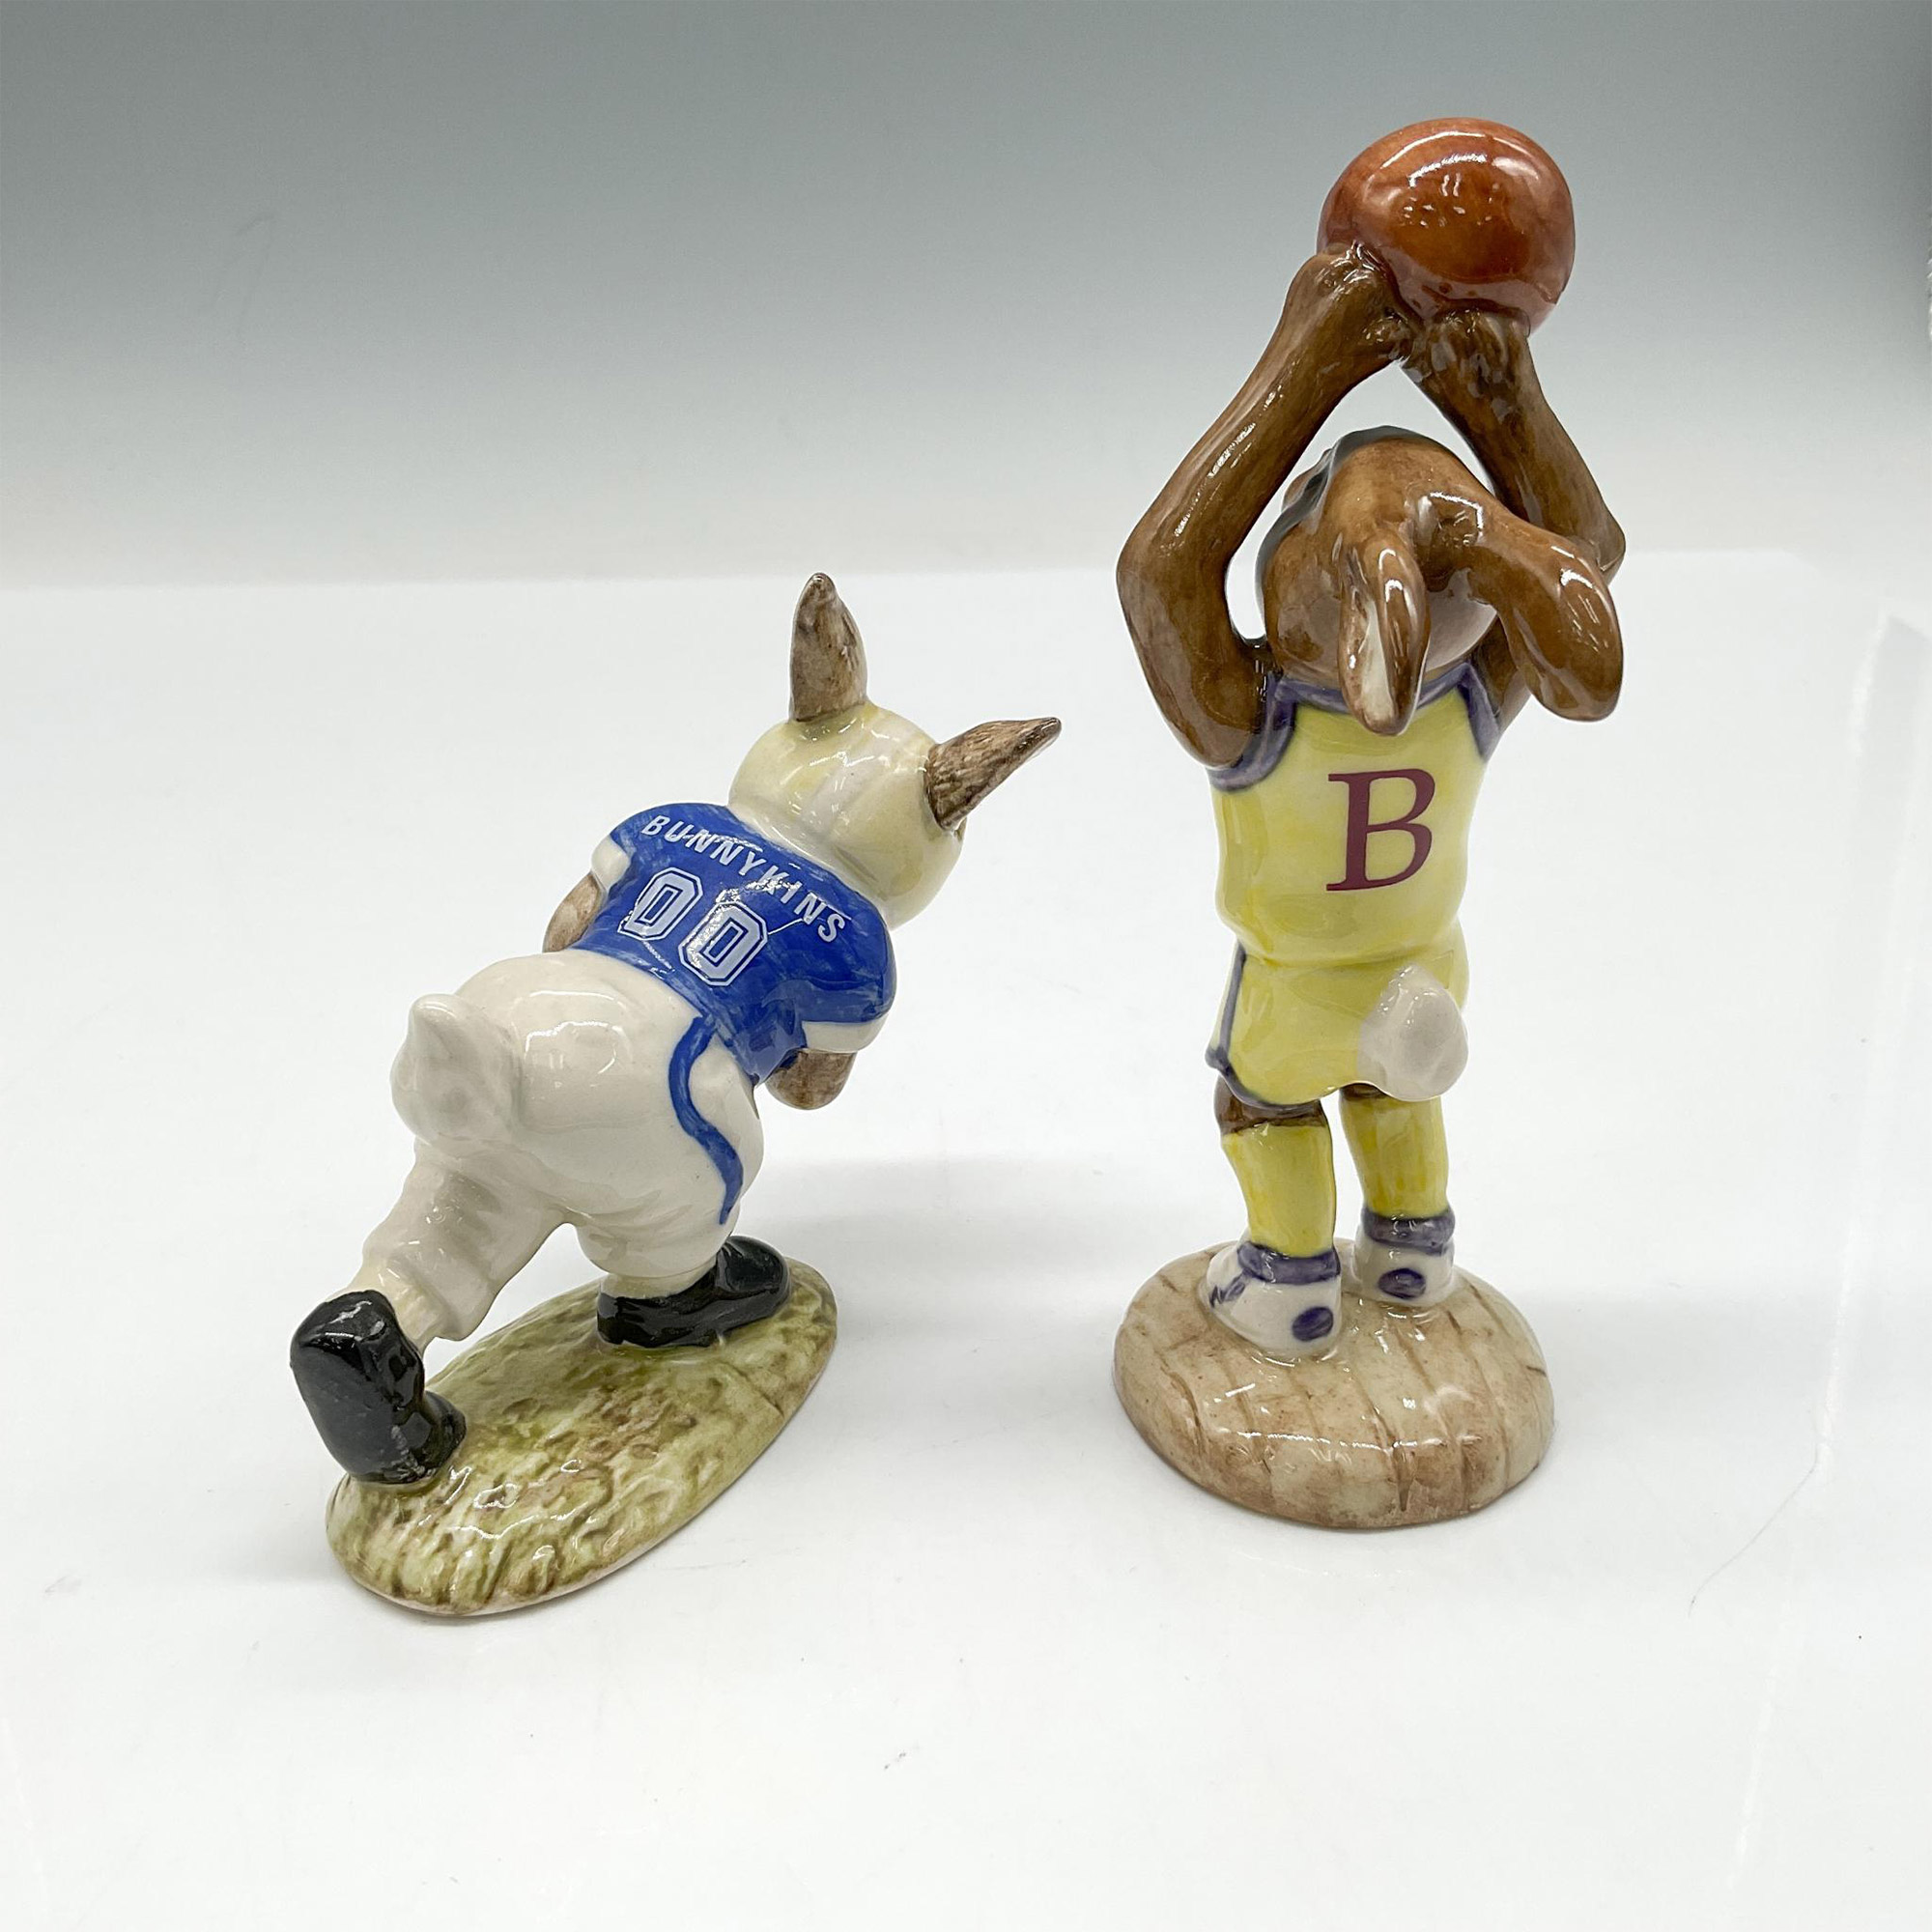 2pc Royal Doulton Bunnykins Figurines, Sports Figurines DB29A + 262 - Image 2 of 4